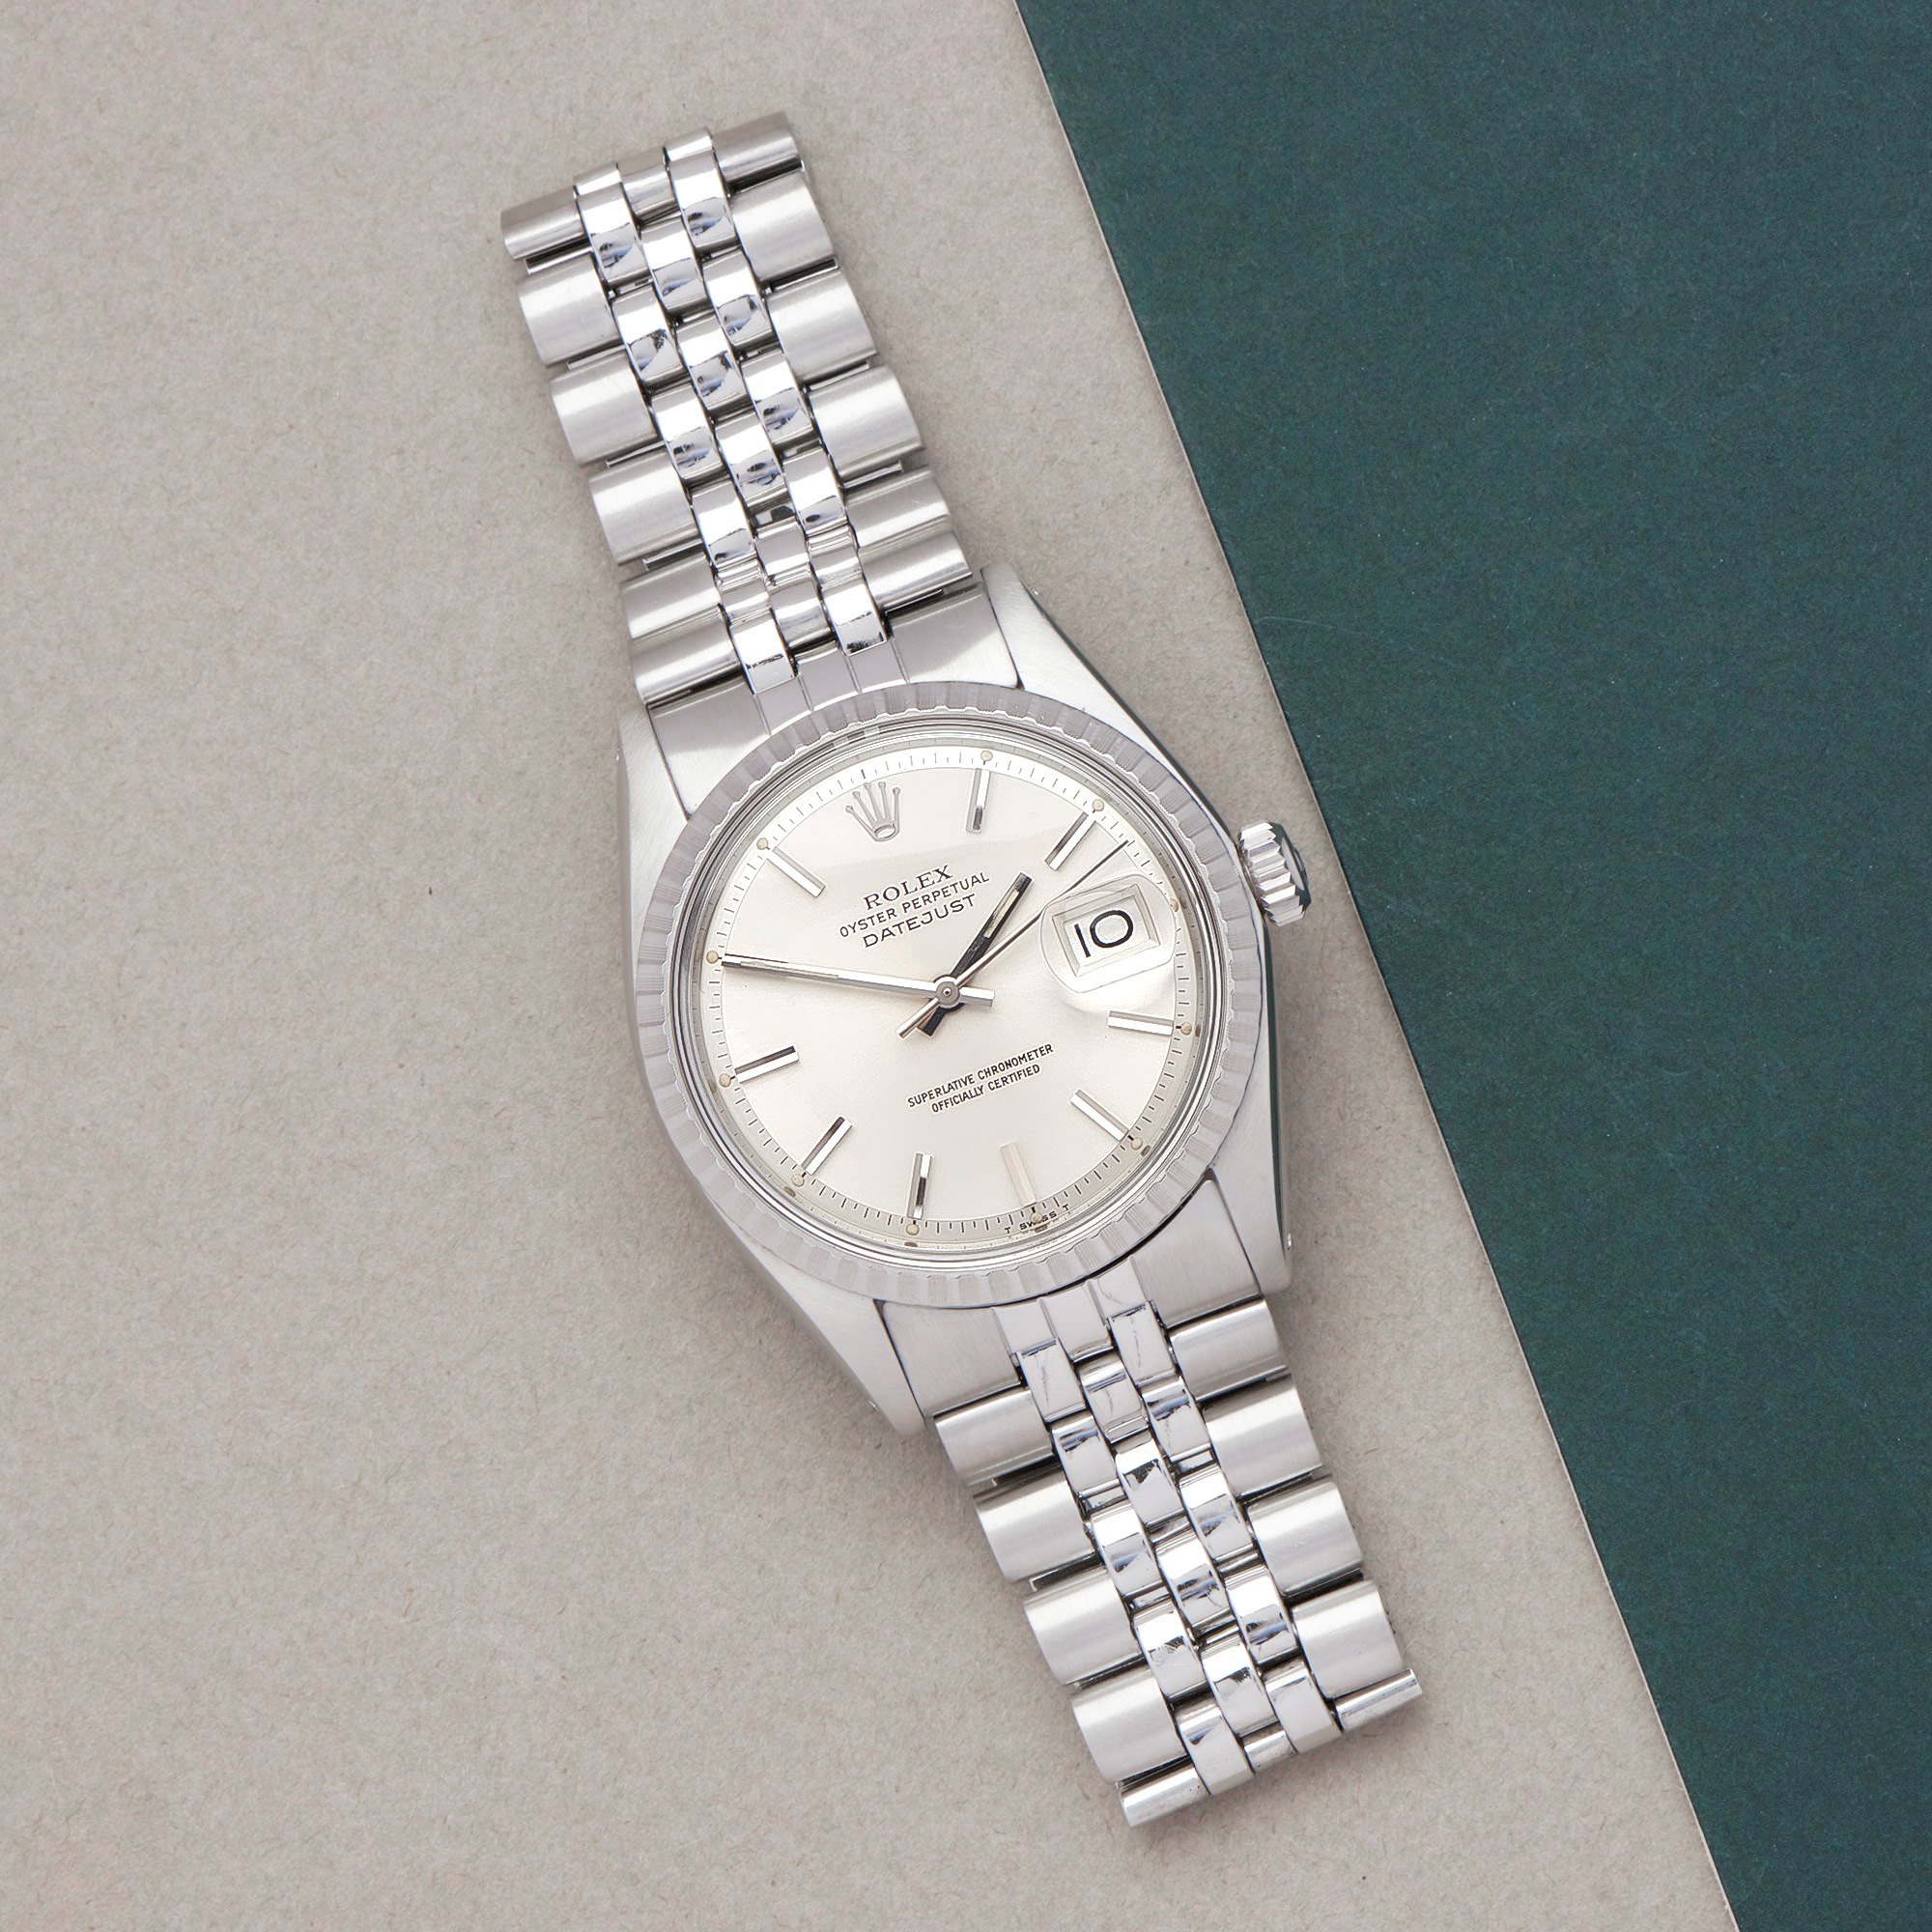 Rolex Datejust 36 Stainless Steel Watch 1603 - Image 10 of 10